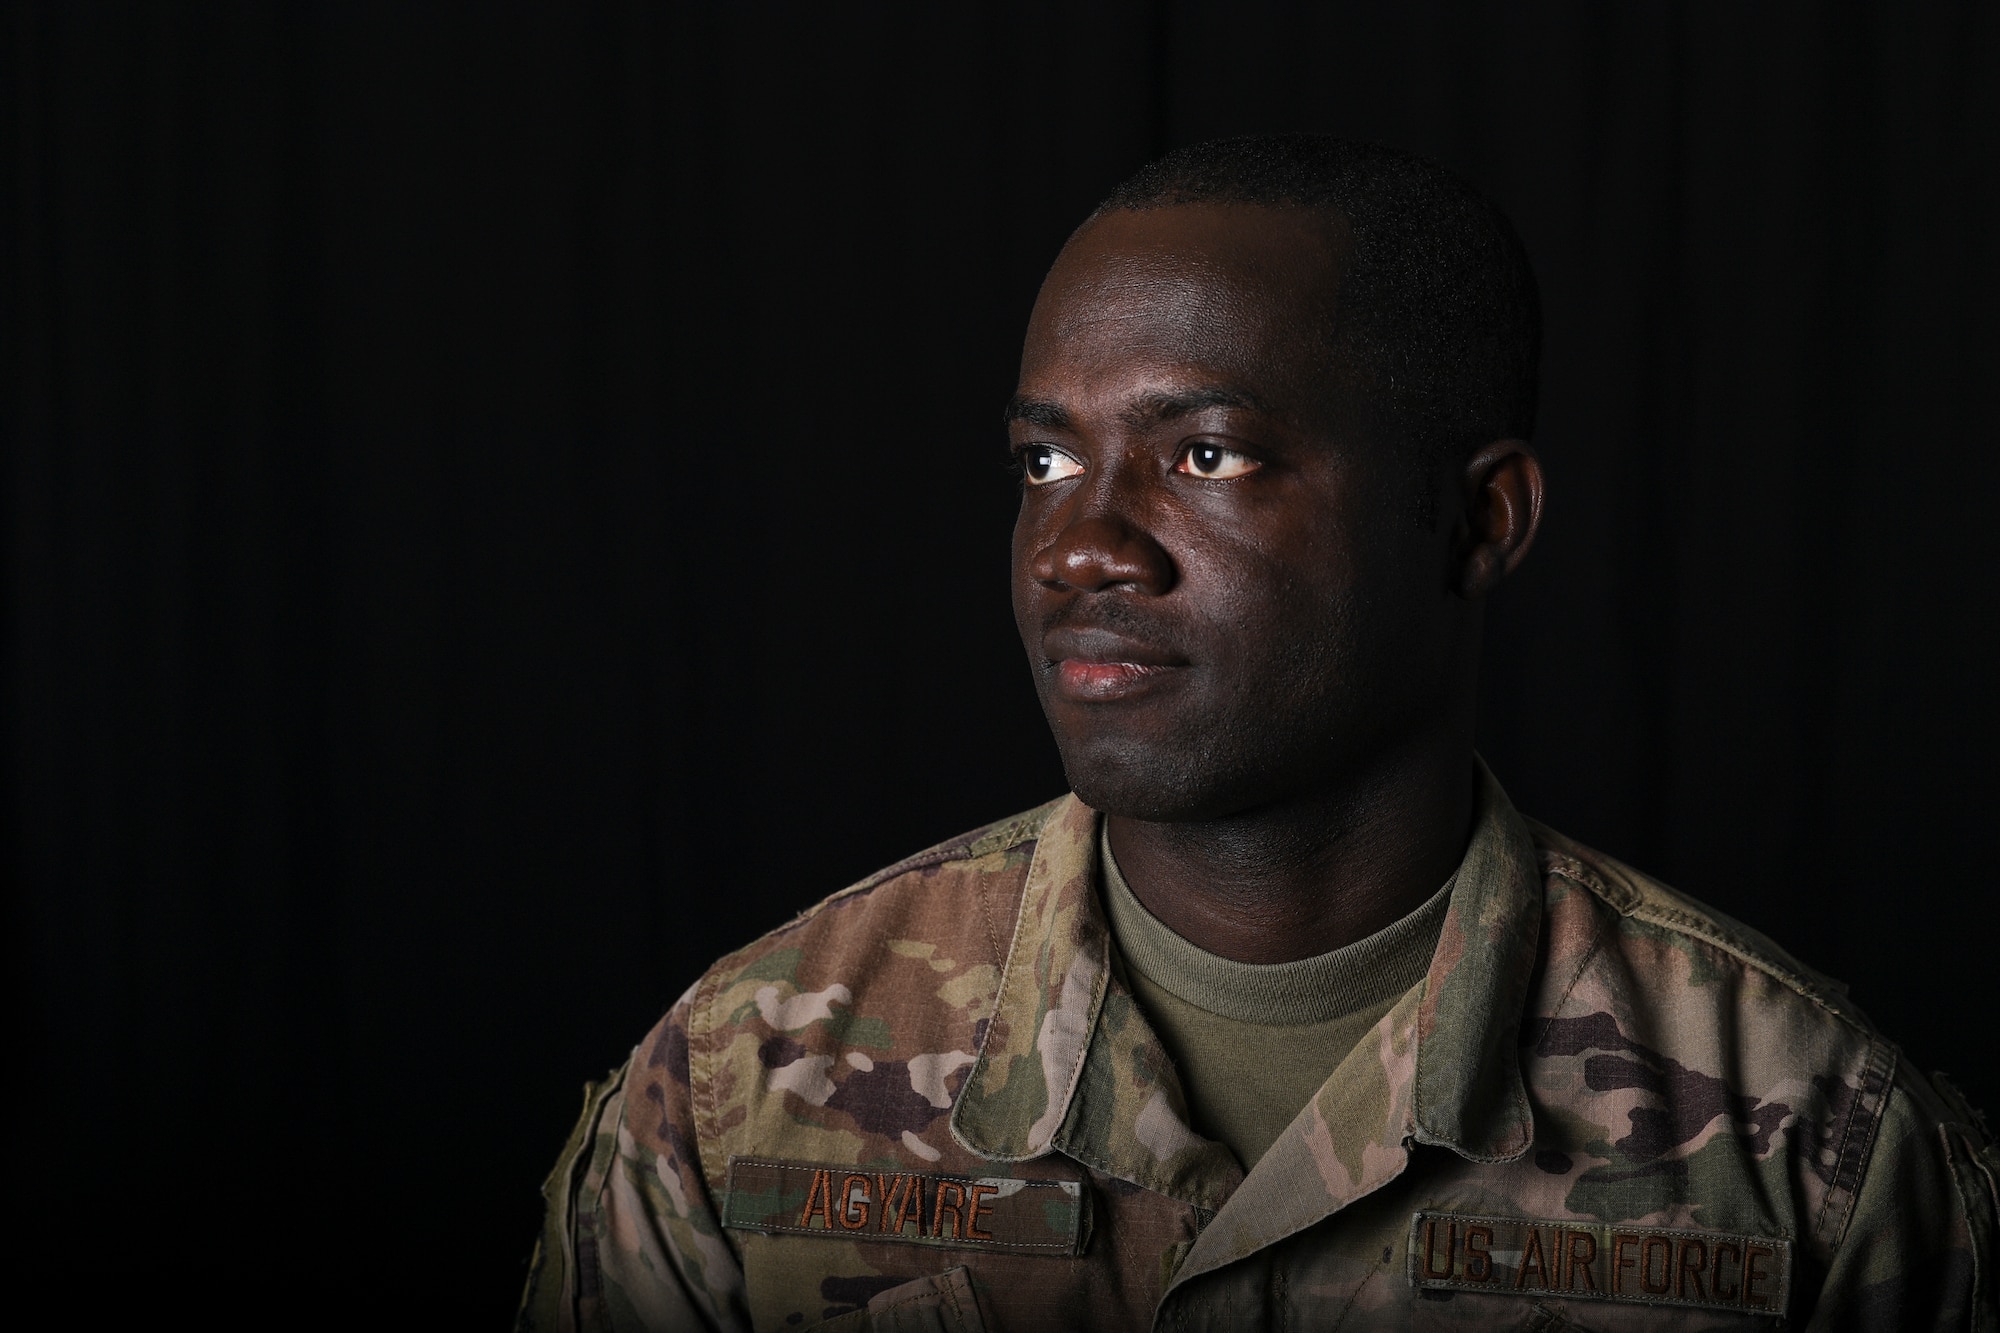 U.S. Air Force Senior Airman Theophilus Agyare, 380th Expeditionary Contracting Squadron contracting officer, poses for a photo at Al Dhafra Air Base, United Arab Emirates, Jan. 17, 2019. In 2014, Agyare received a visa and left his home country, to fulfill his childhood dream of being in the military while supporting his family back home in Ghana. (U.S. Air Force photo by Senior Airman Mya M. Crosby)